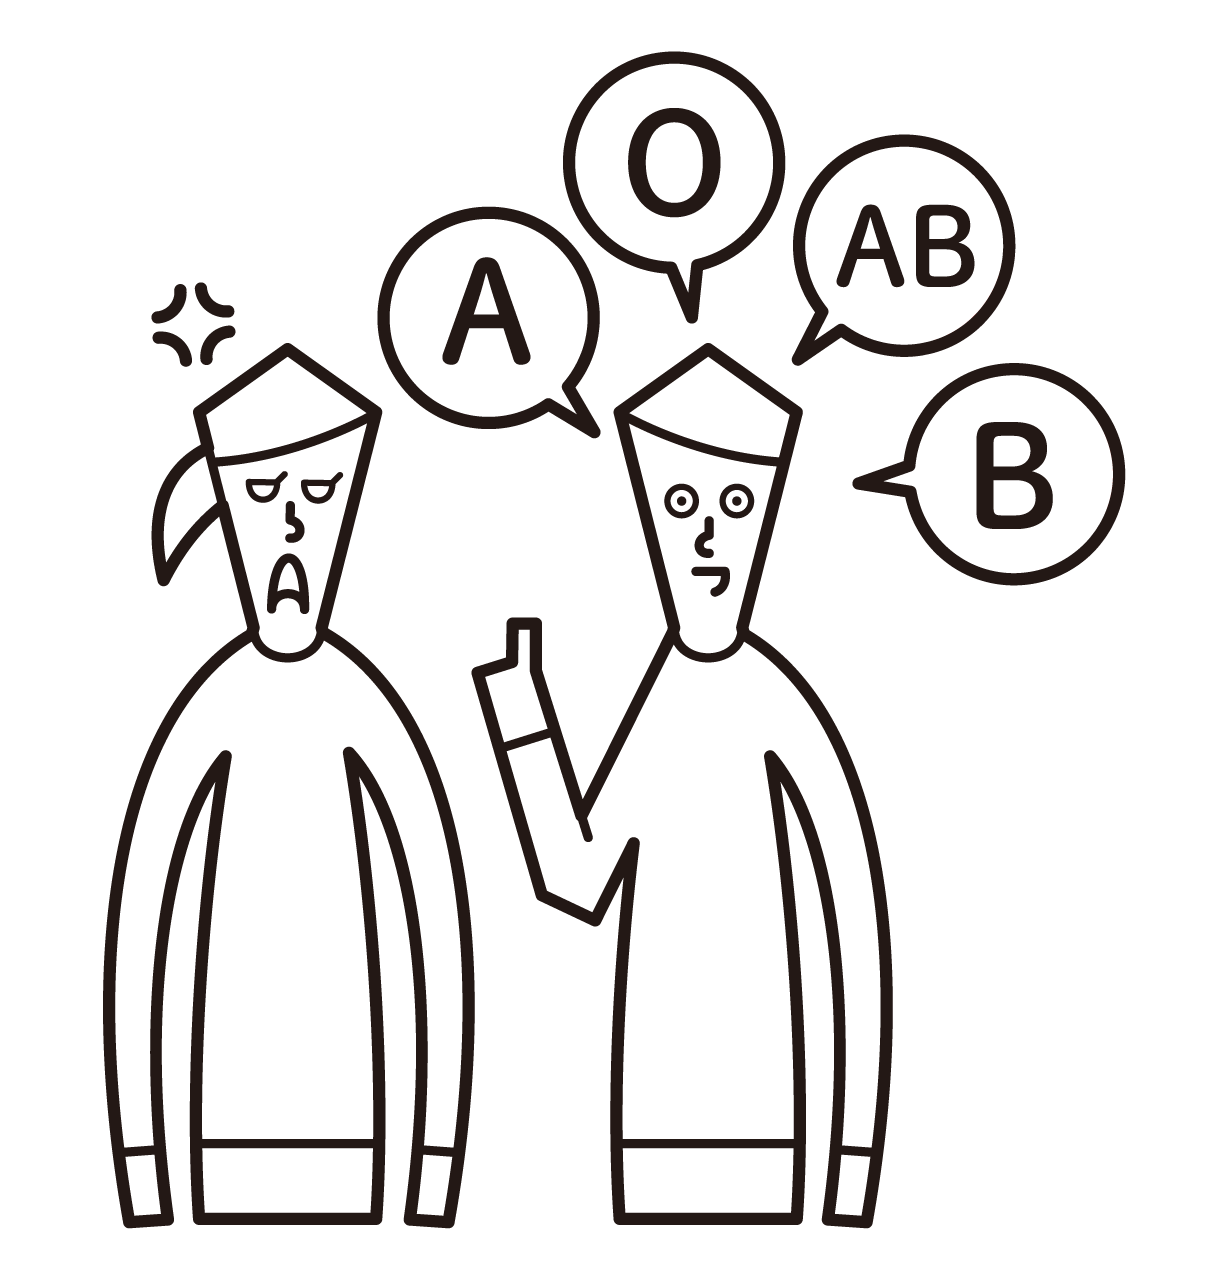 Illustration of a person (male) who is harassing blood type